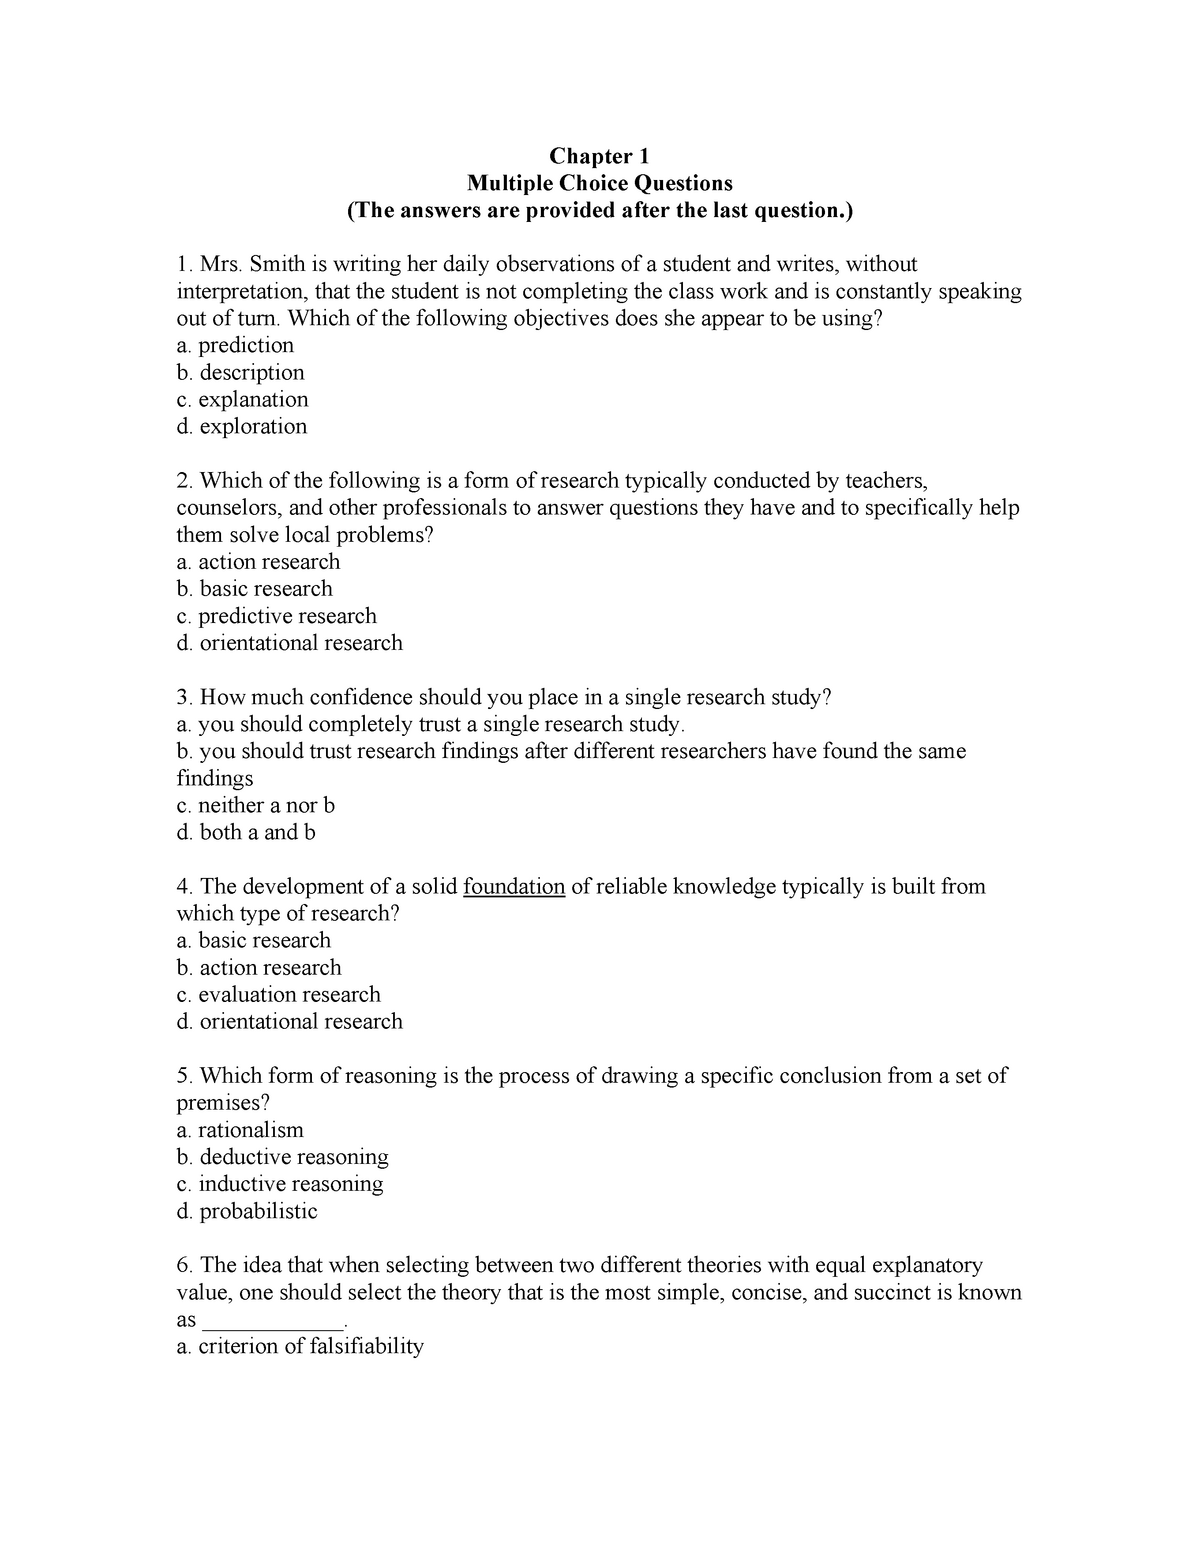 qualitative research multiple choice questions and answers pdf